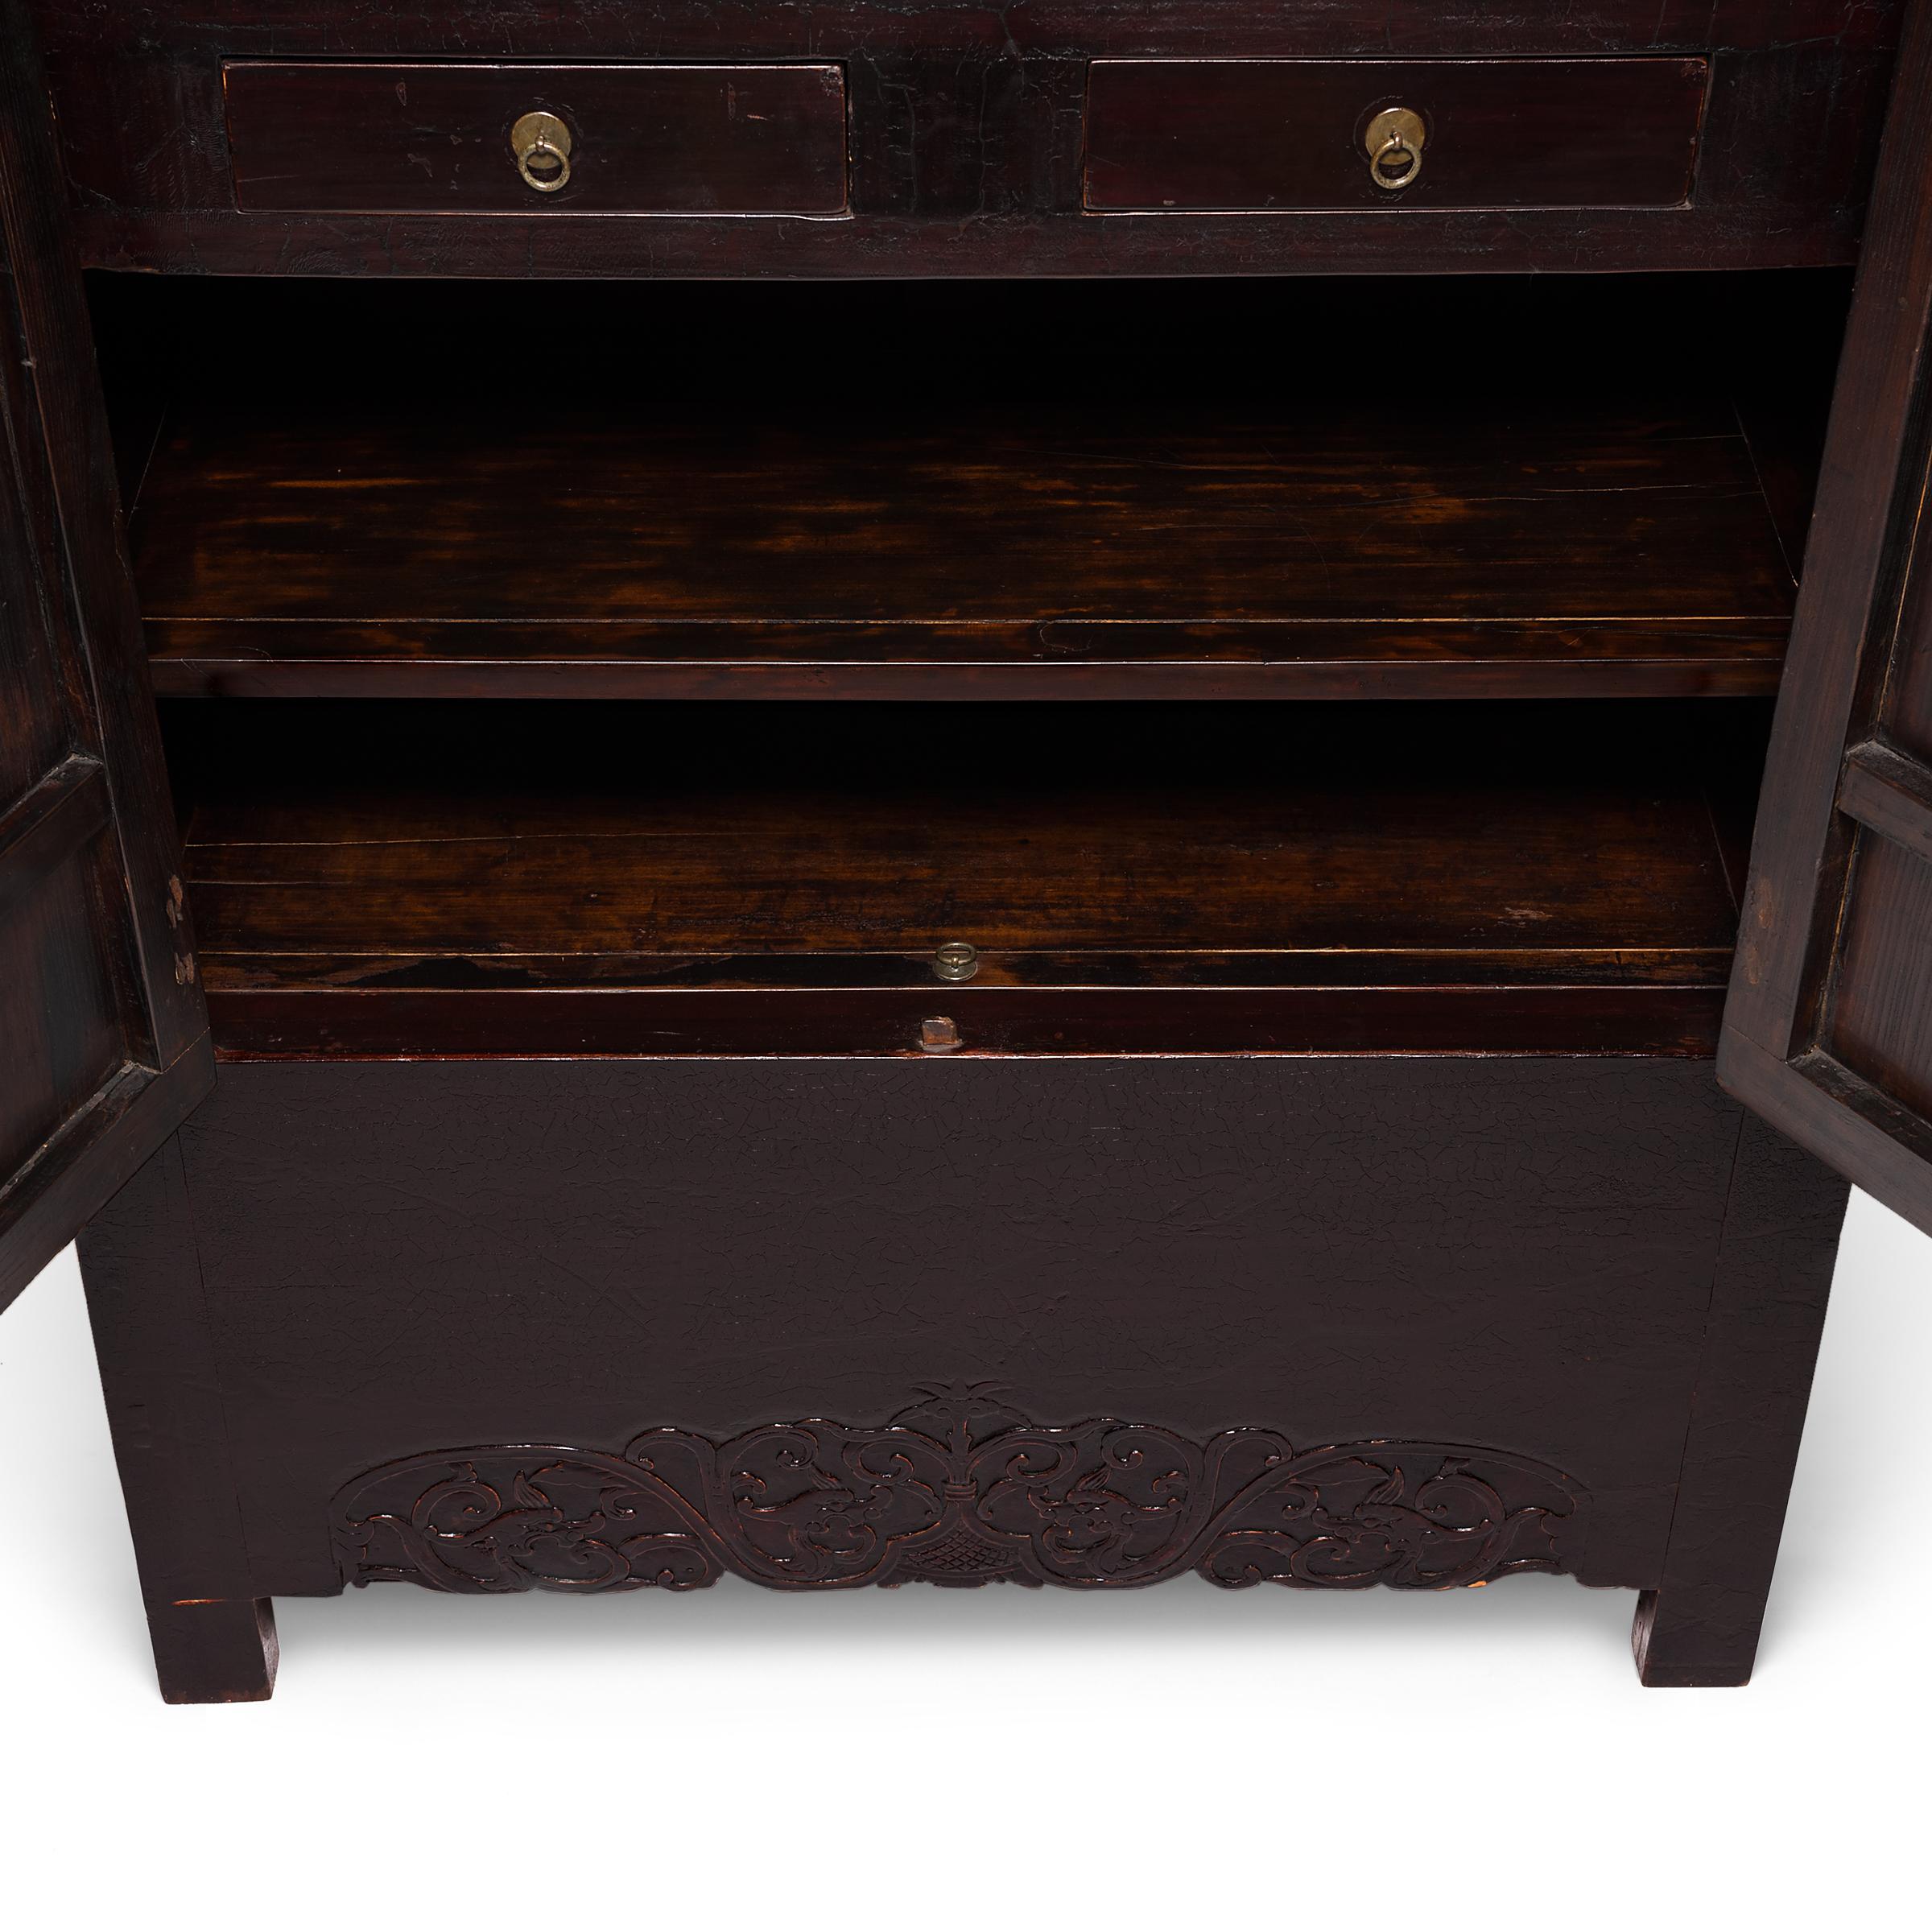 Elm Chinese Crackled Lacquer Cabinet, c. 1850